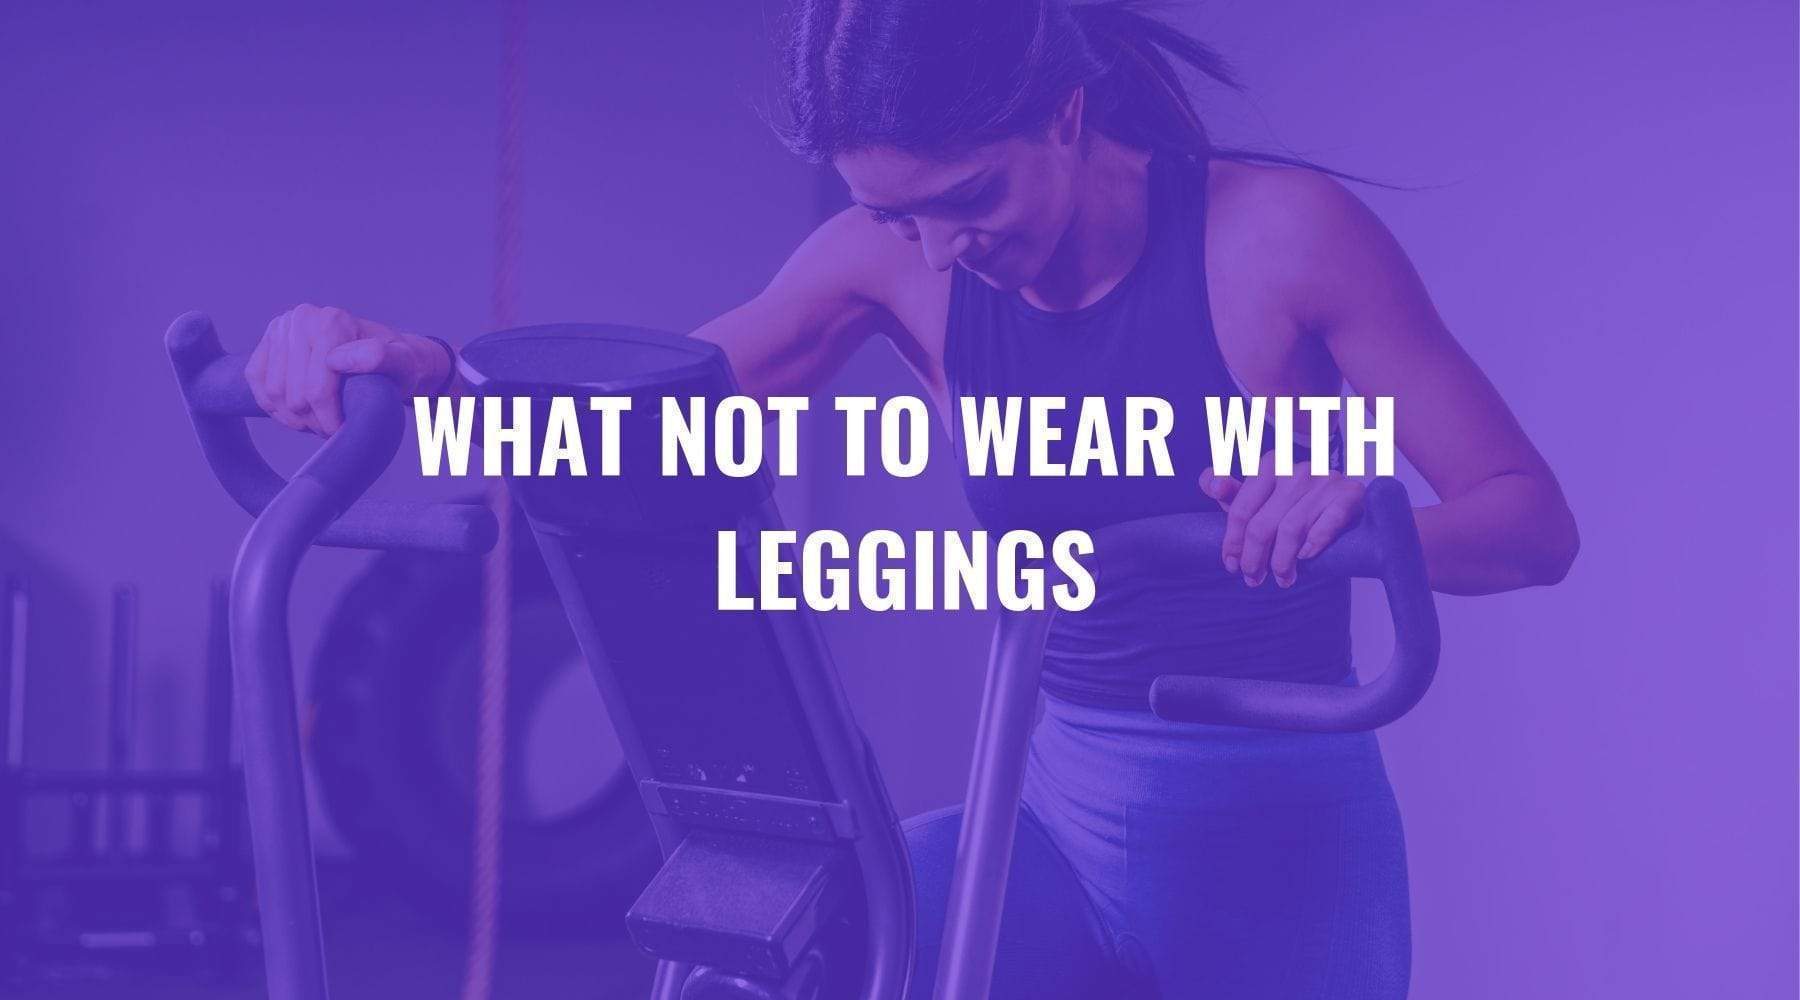 What Not to Wear with Leggings